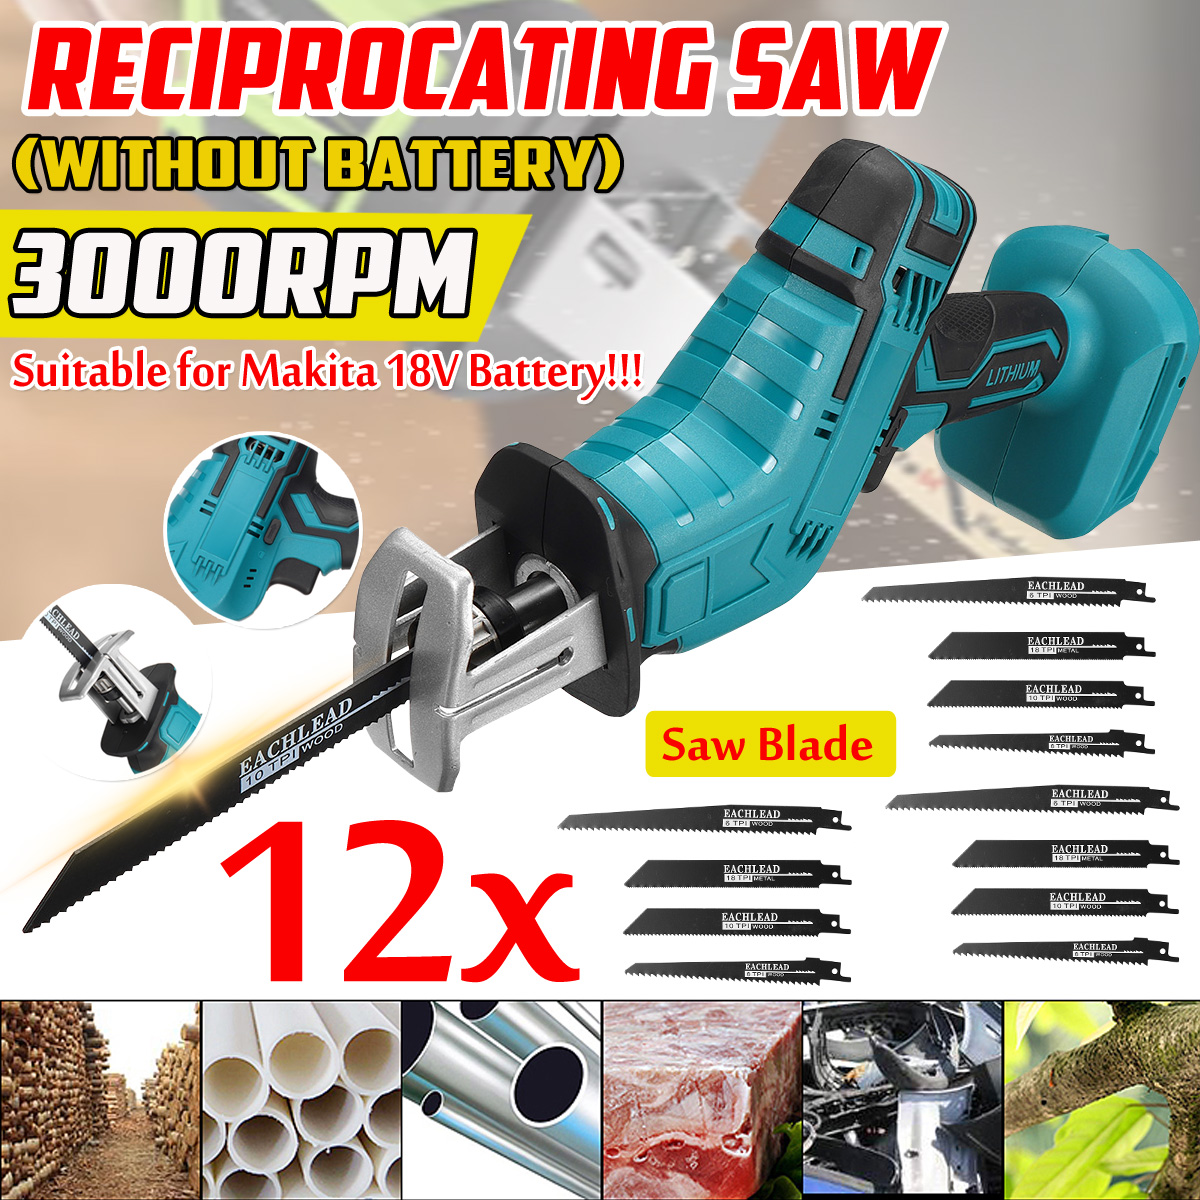 18V-Cordless-Electric-Reciprocating-Saw-Variable-Speed-Metal-Wood-Cutting-Tool-Saber-Saw-W-12X-Blade-1723641-1